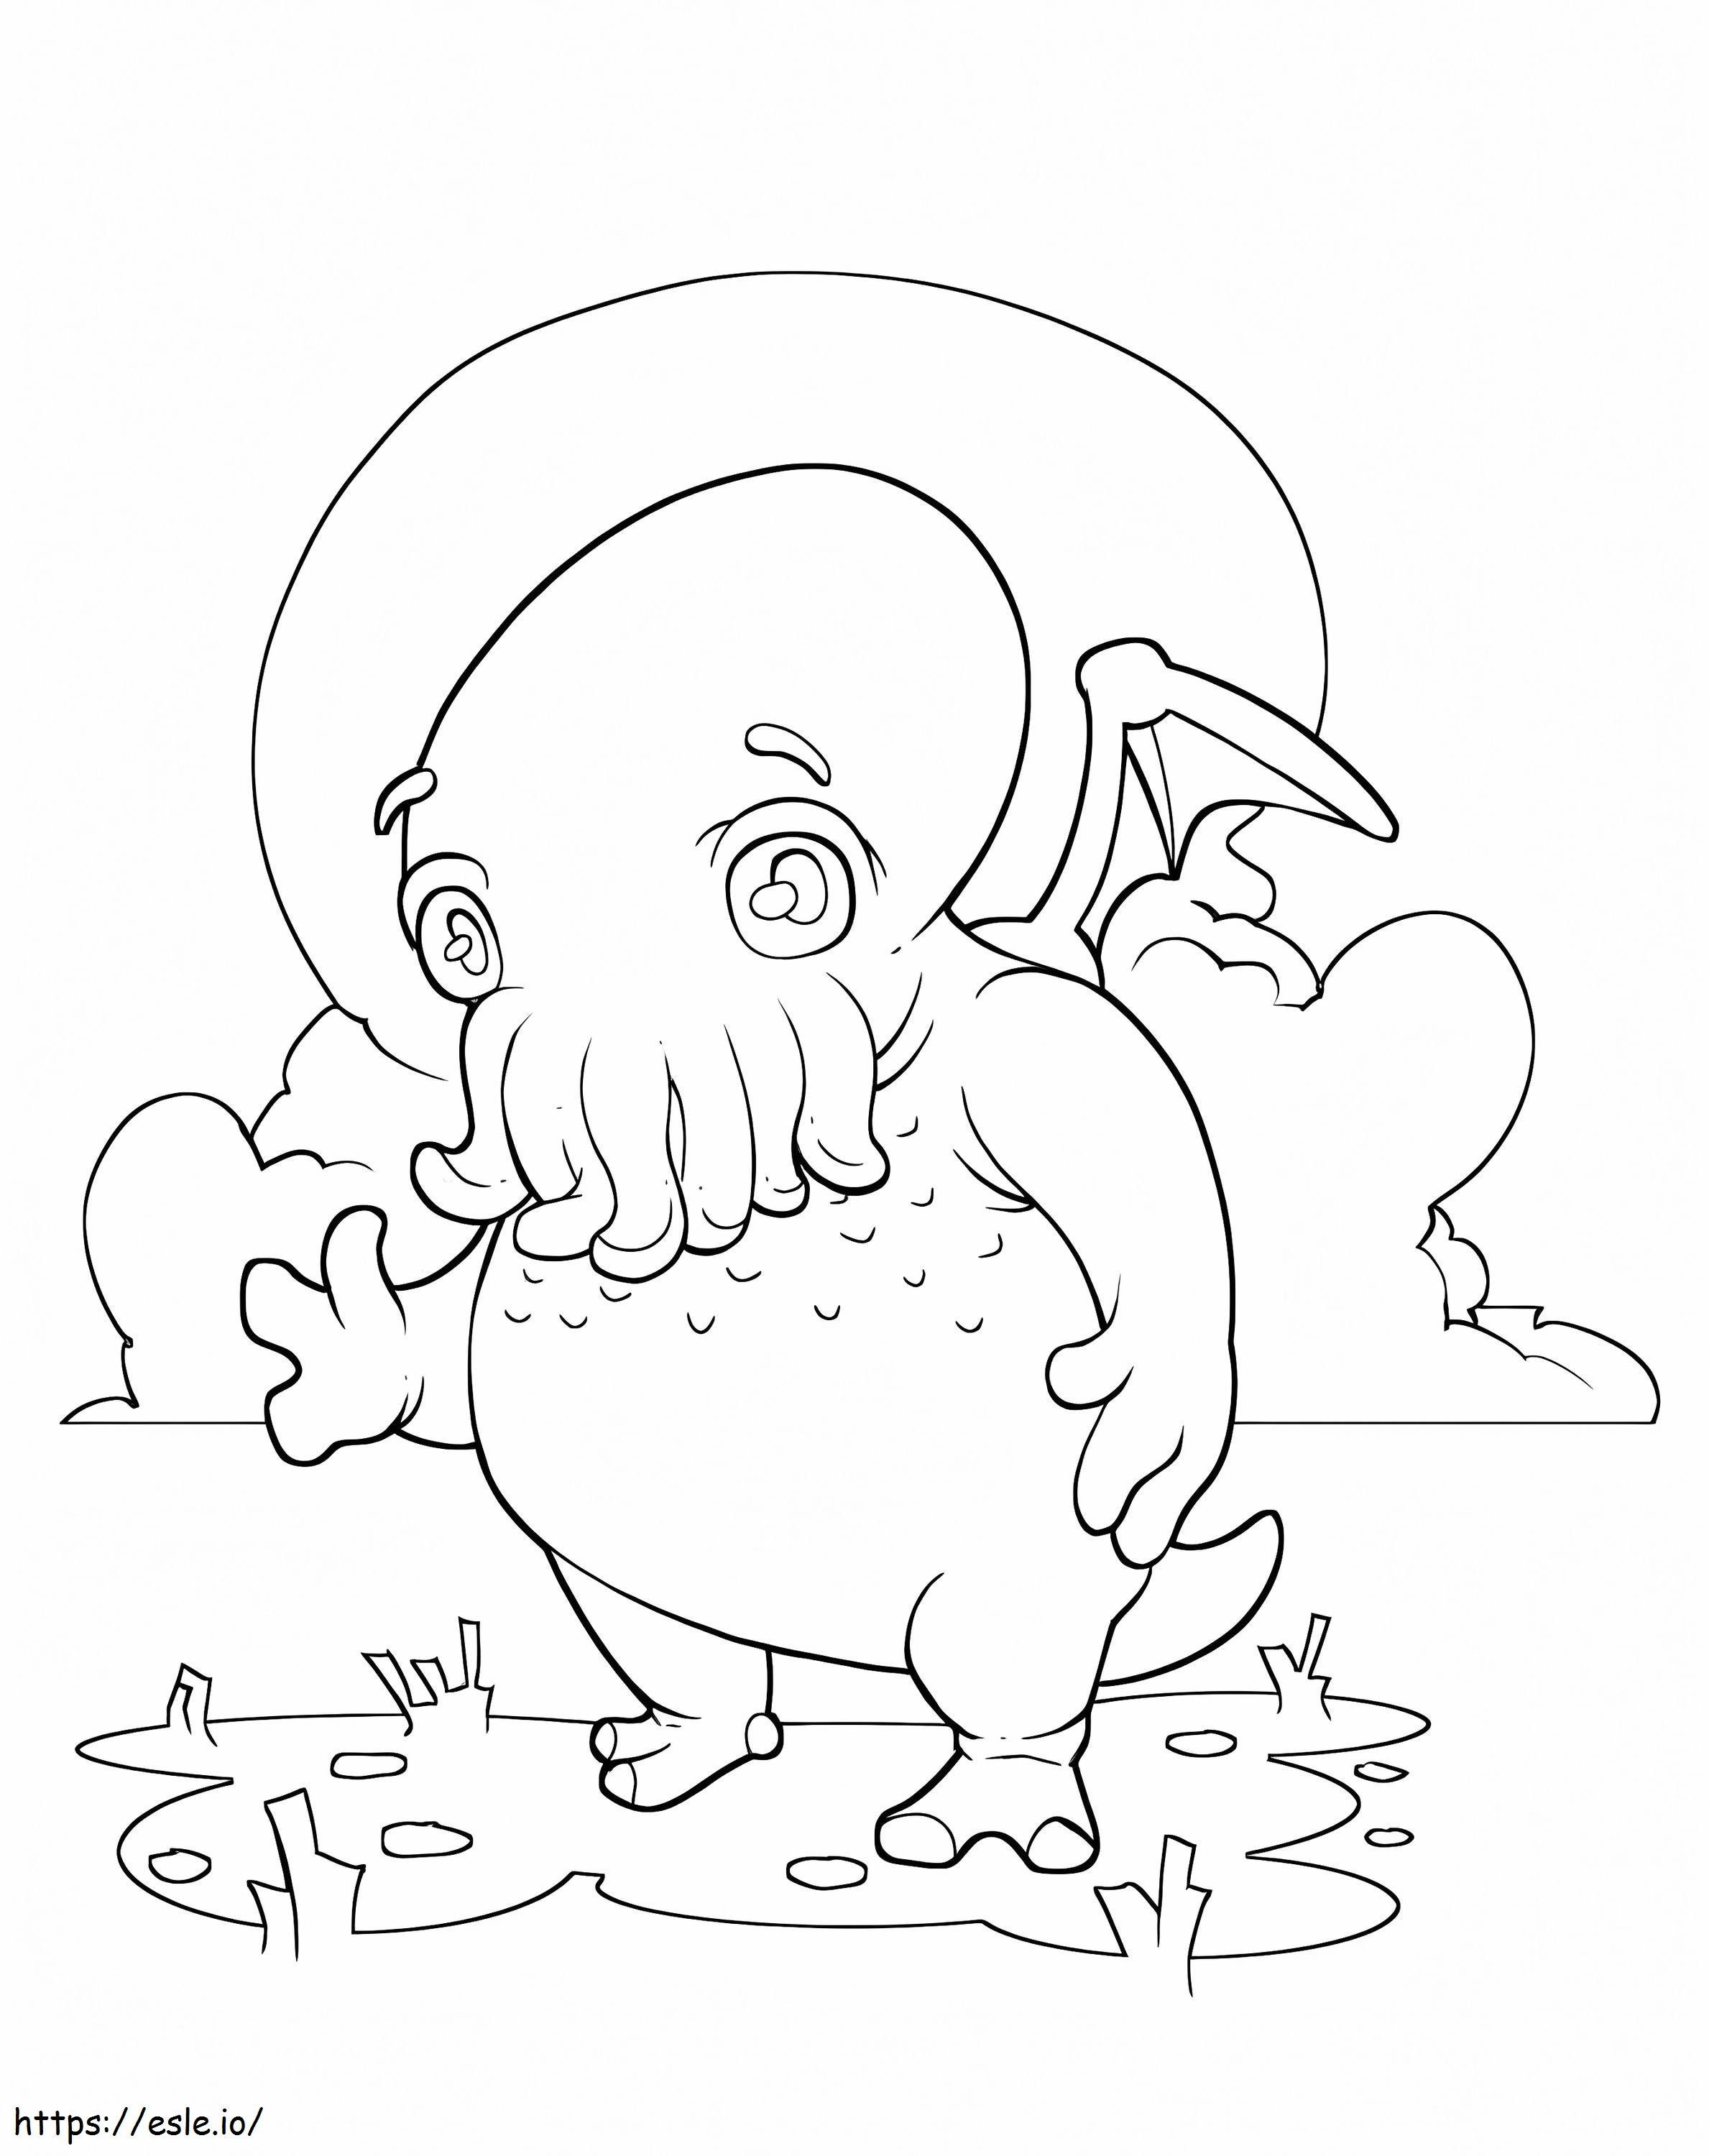 Printable Cute Cthulhu coloring page